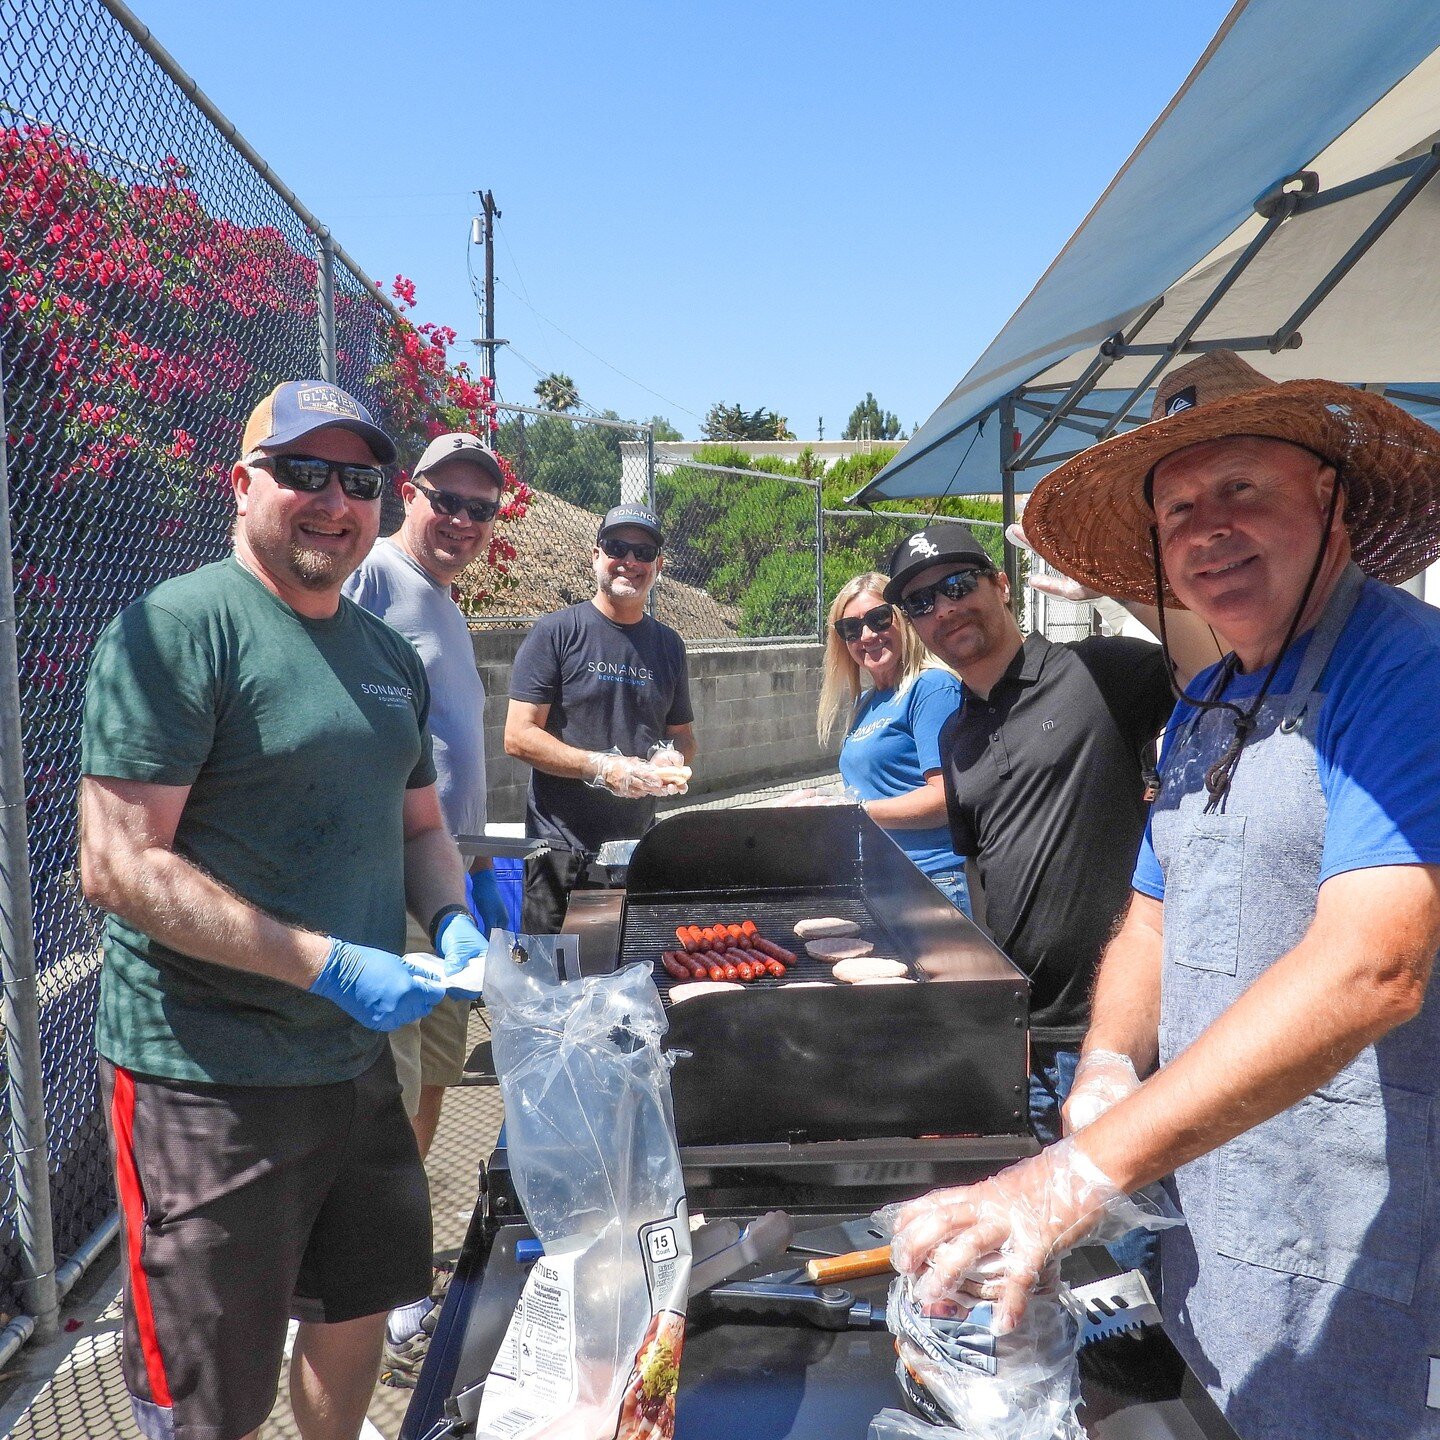 This summer, Sonance Foundation was able to volunteer at the 
@bgcsouthcoast Summer Barbecues to provide hot meals and delicious snacks for all the kids. We grilled up hot dogs and hamburgers, had side fruits, veggies, chips as well as Nutella biscui